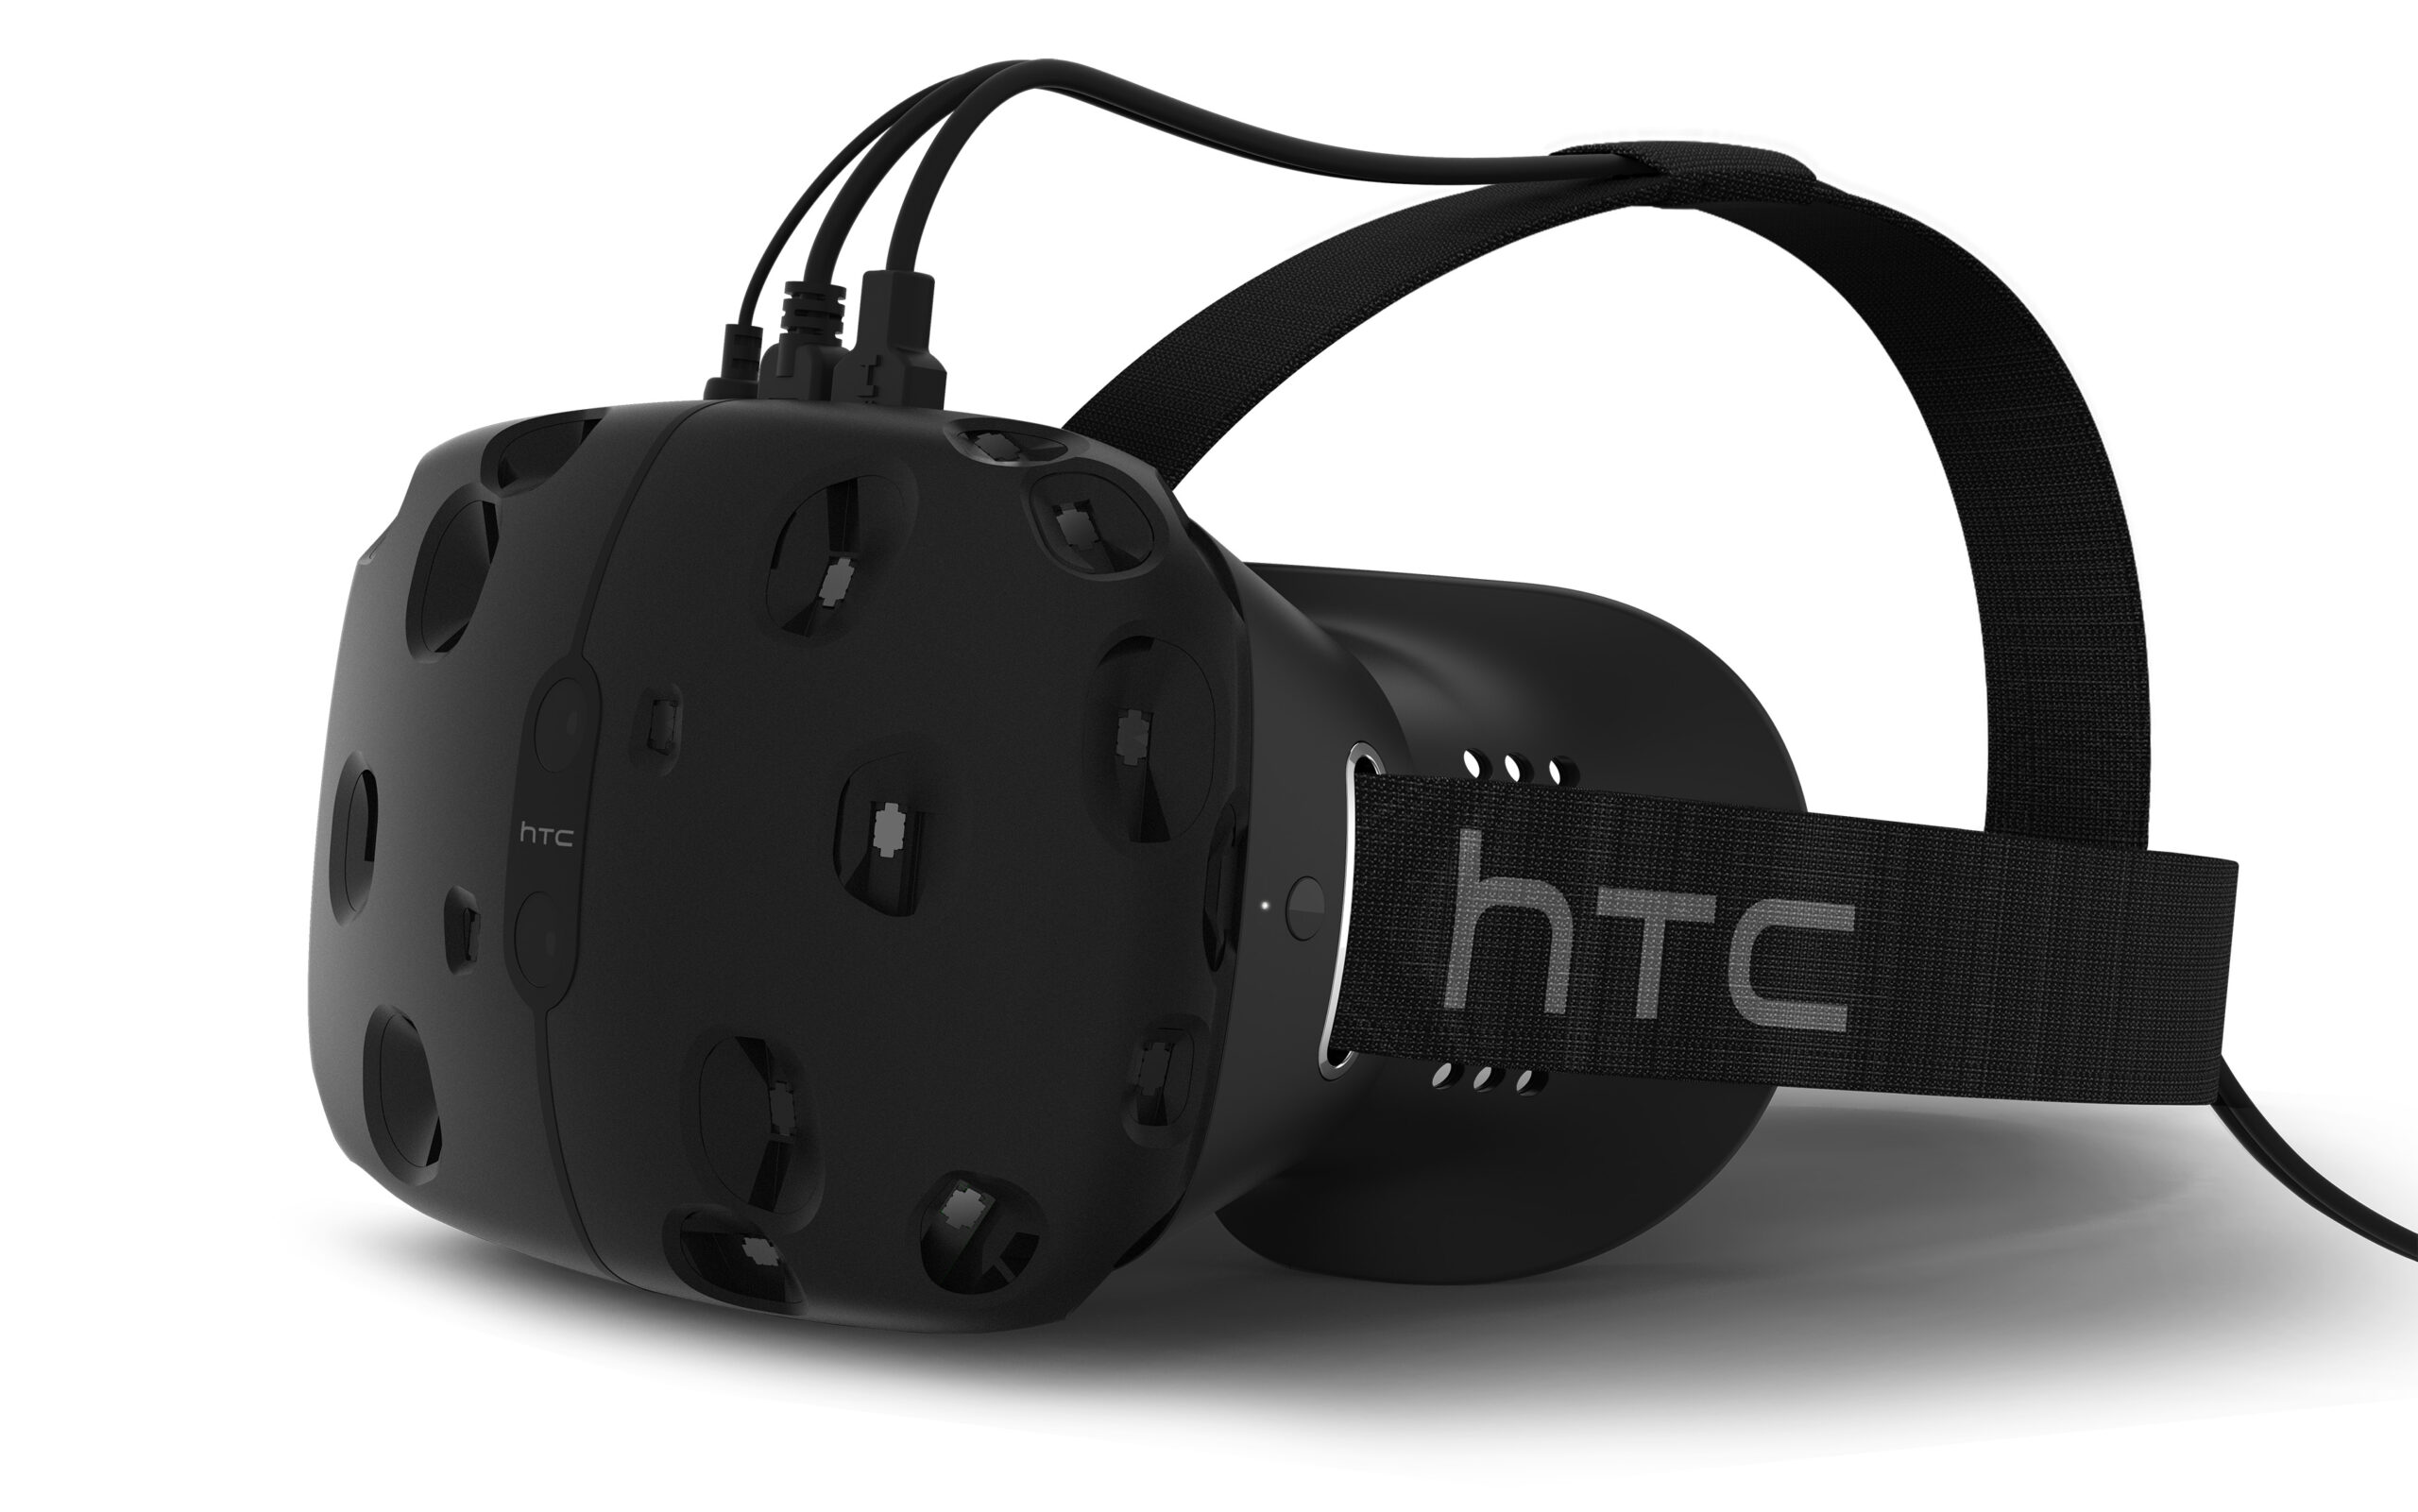 With Valve, HTC Unveils New Virtual Reality Headset ‘HTC Vive’